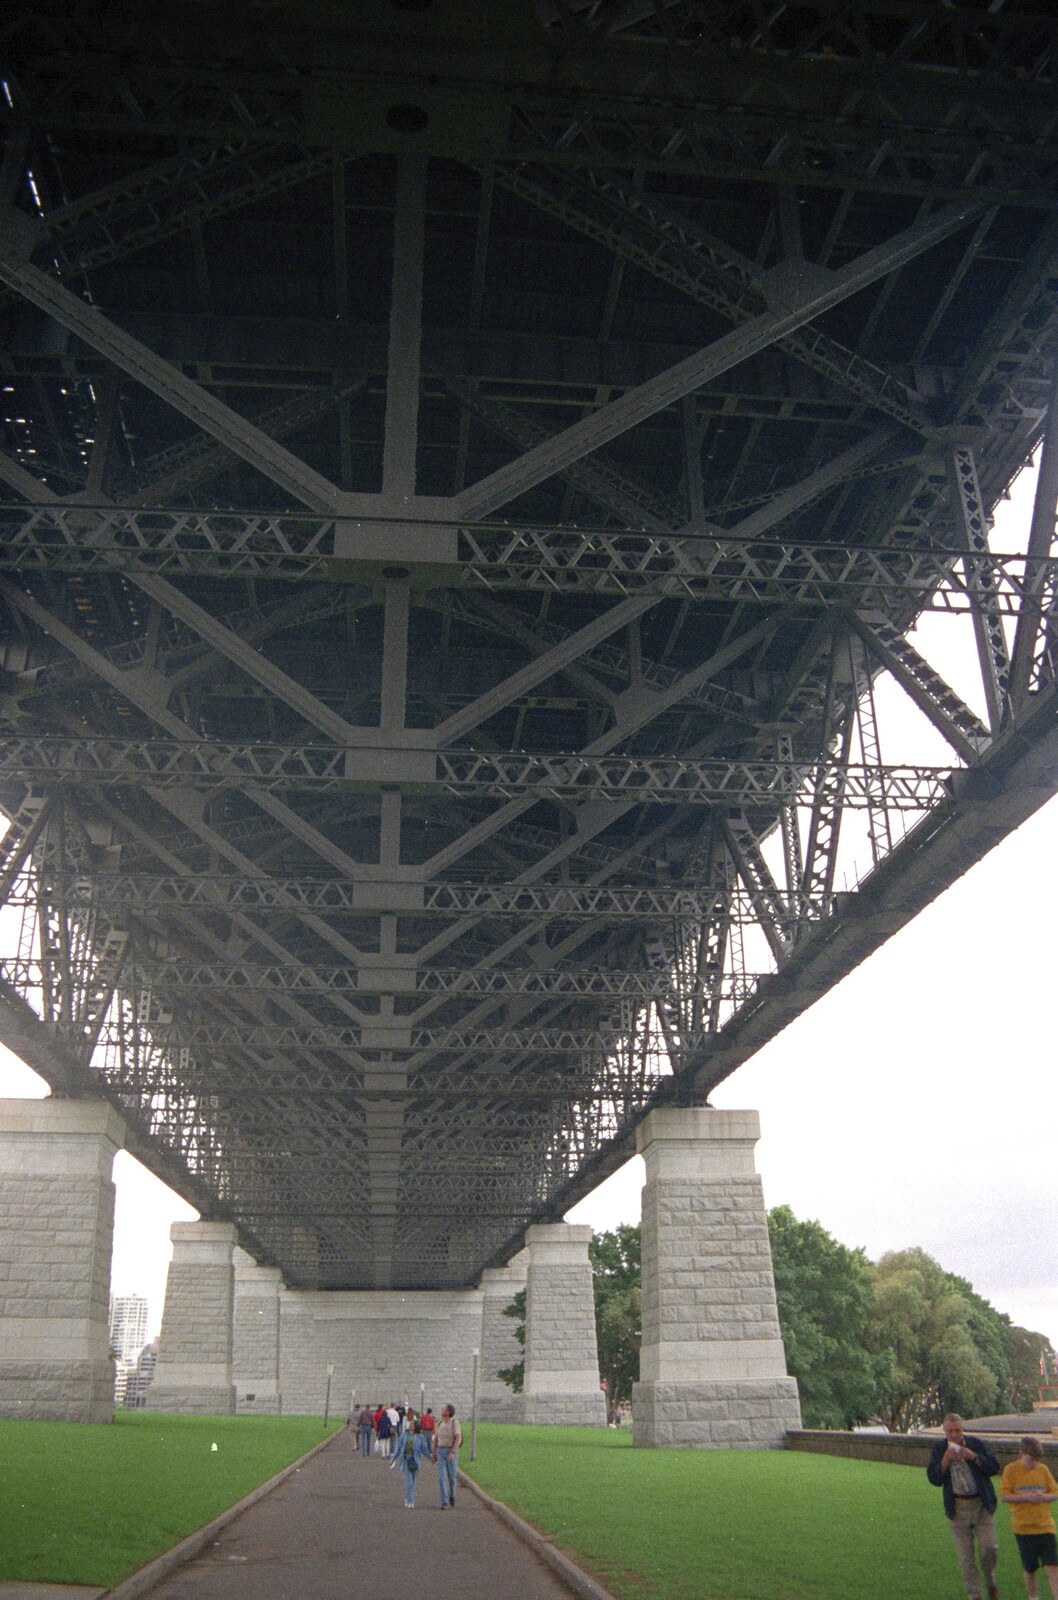 Under the Sydney Harbour Bridge from A Trip to the Zoo, Sydney, Australia - 7th April 2000